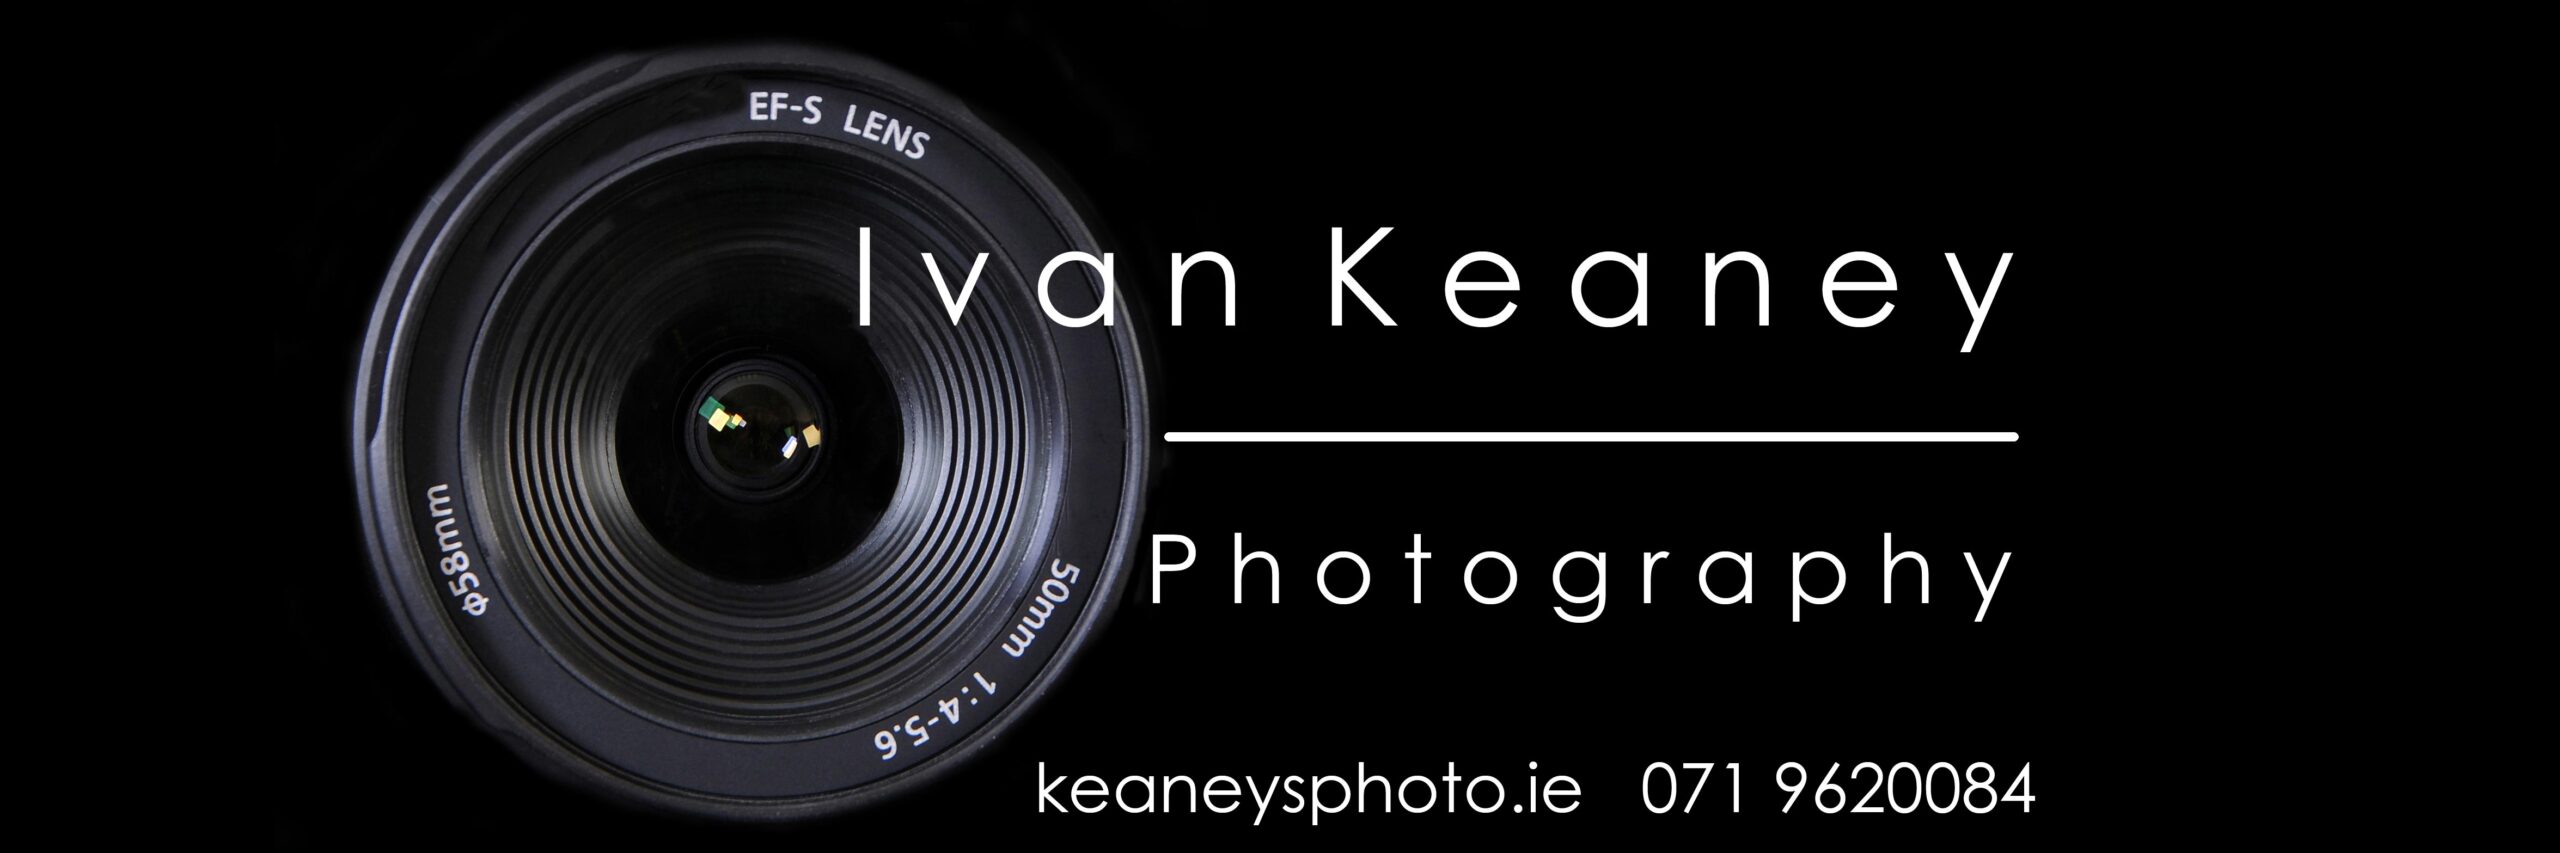 Keaney's Photographic - Sponsors of our St. Mary's Kiltoghert coverage